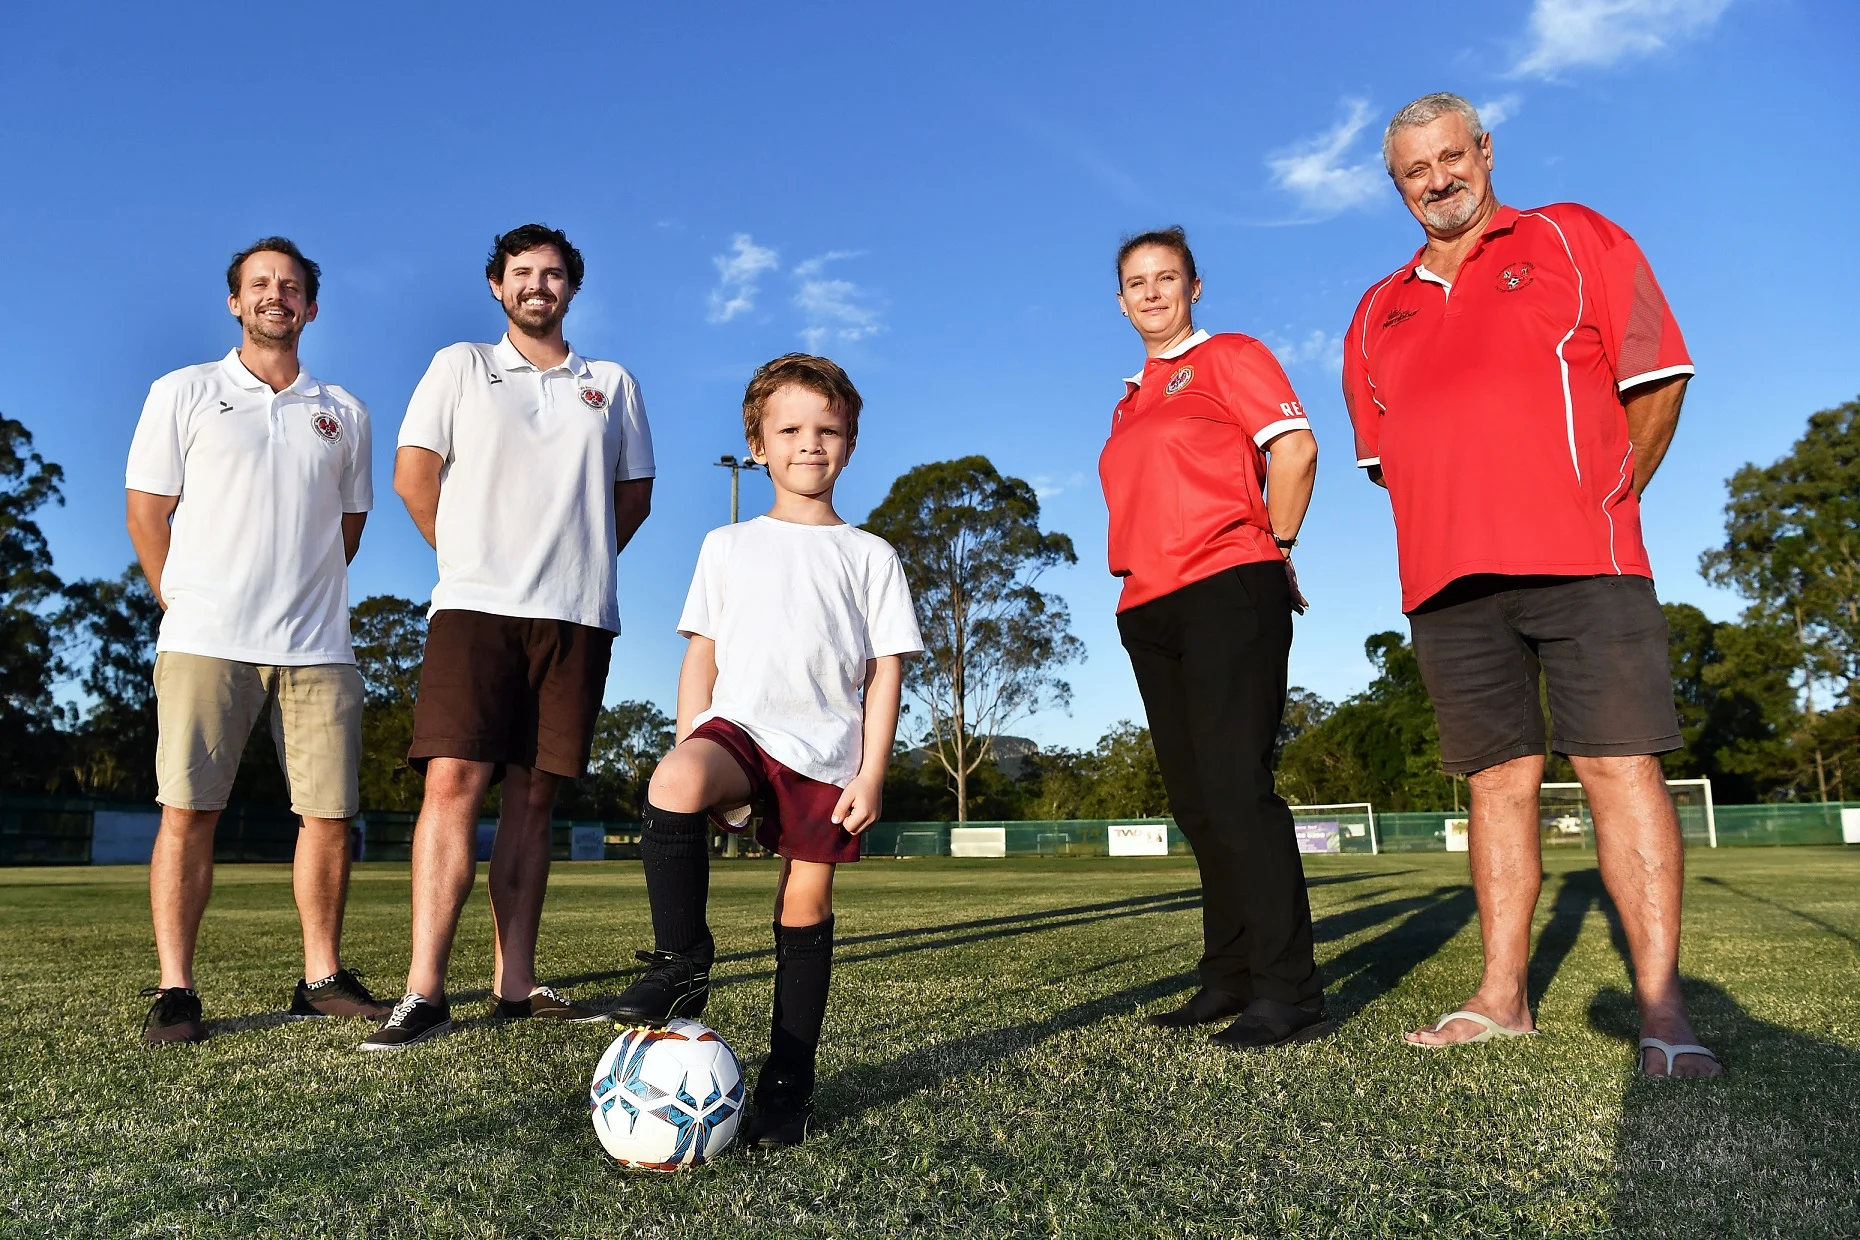 (Left to right) Three generations of another passionate Reds family: Quinn O’Keefe, Lachlan O’Keefe, Jack O’Keefe, Bonnie O’Keefe and lifetime NYU Football Club member Peter O’Keefe.